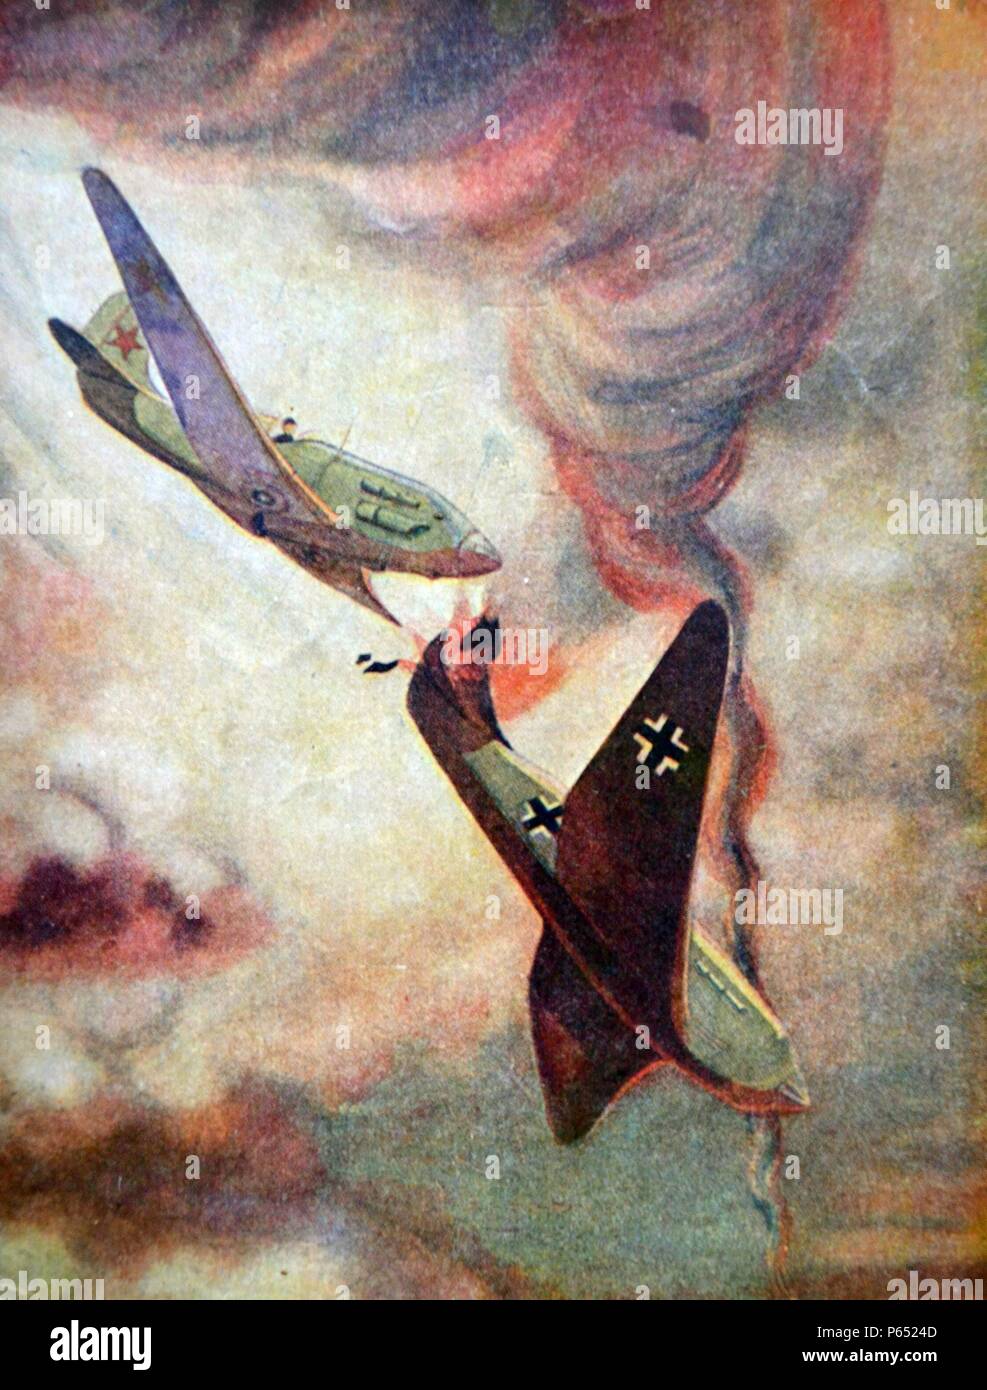 World war Two, Soviet propaganda postcard depicting an aerial dog fight, between a Russian (Soviet) aircraft and a German plane which is crashing in flames over Russia. Stock Photo